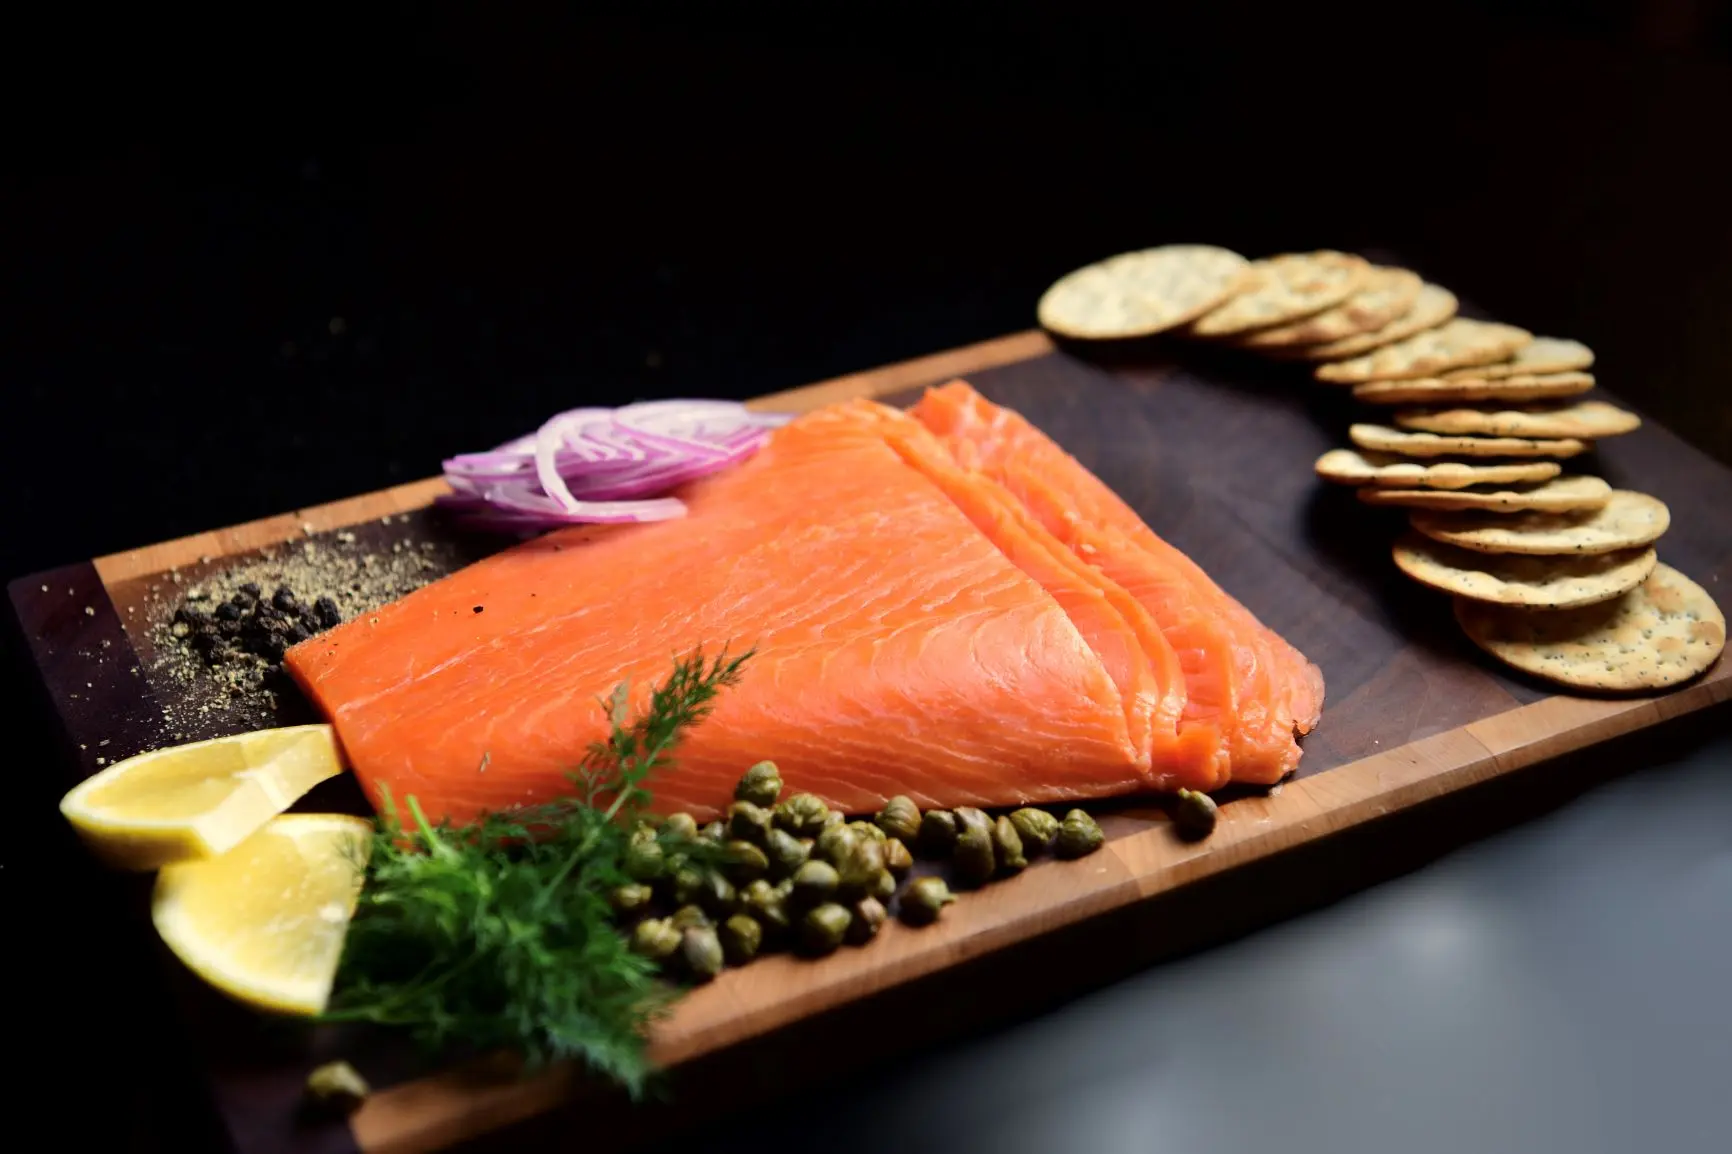 best smoked salmon to buy online - How do you pick the best smoked salmon